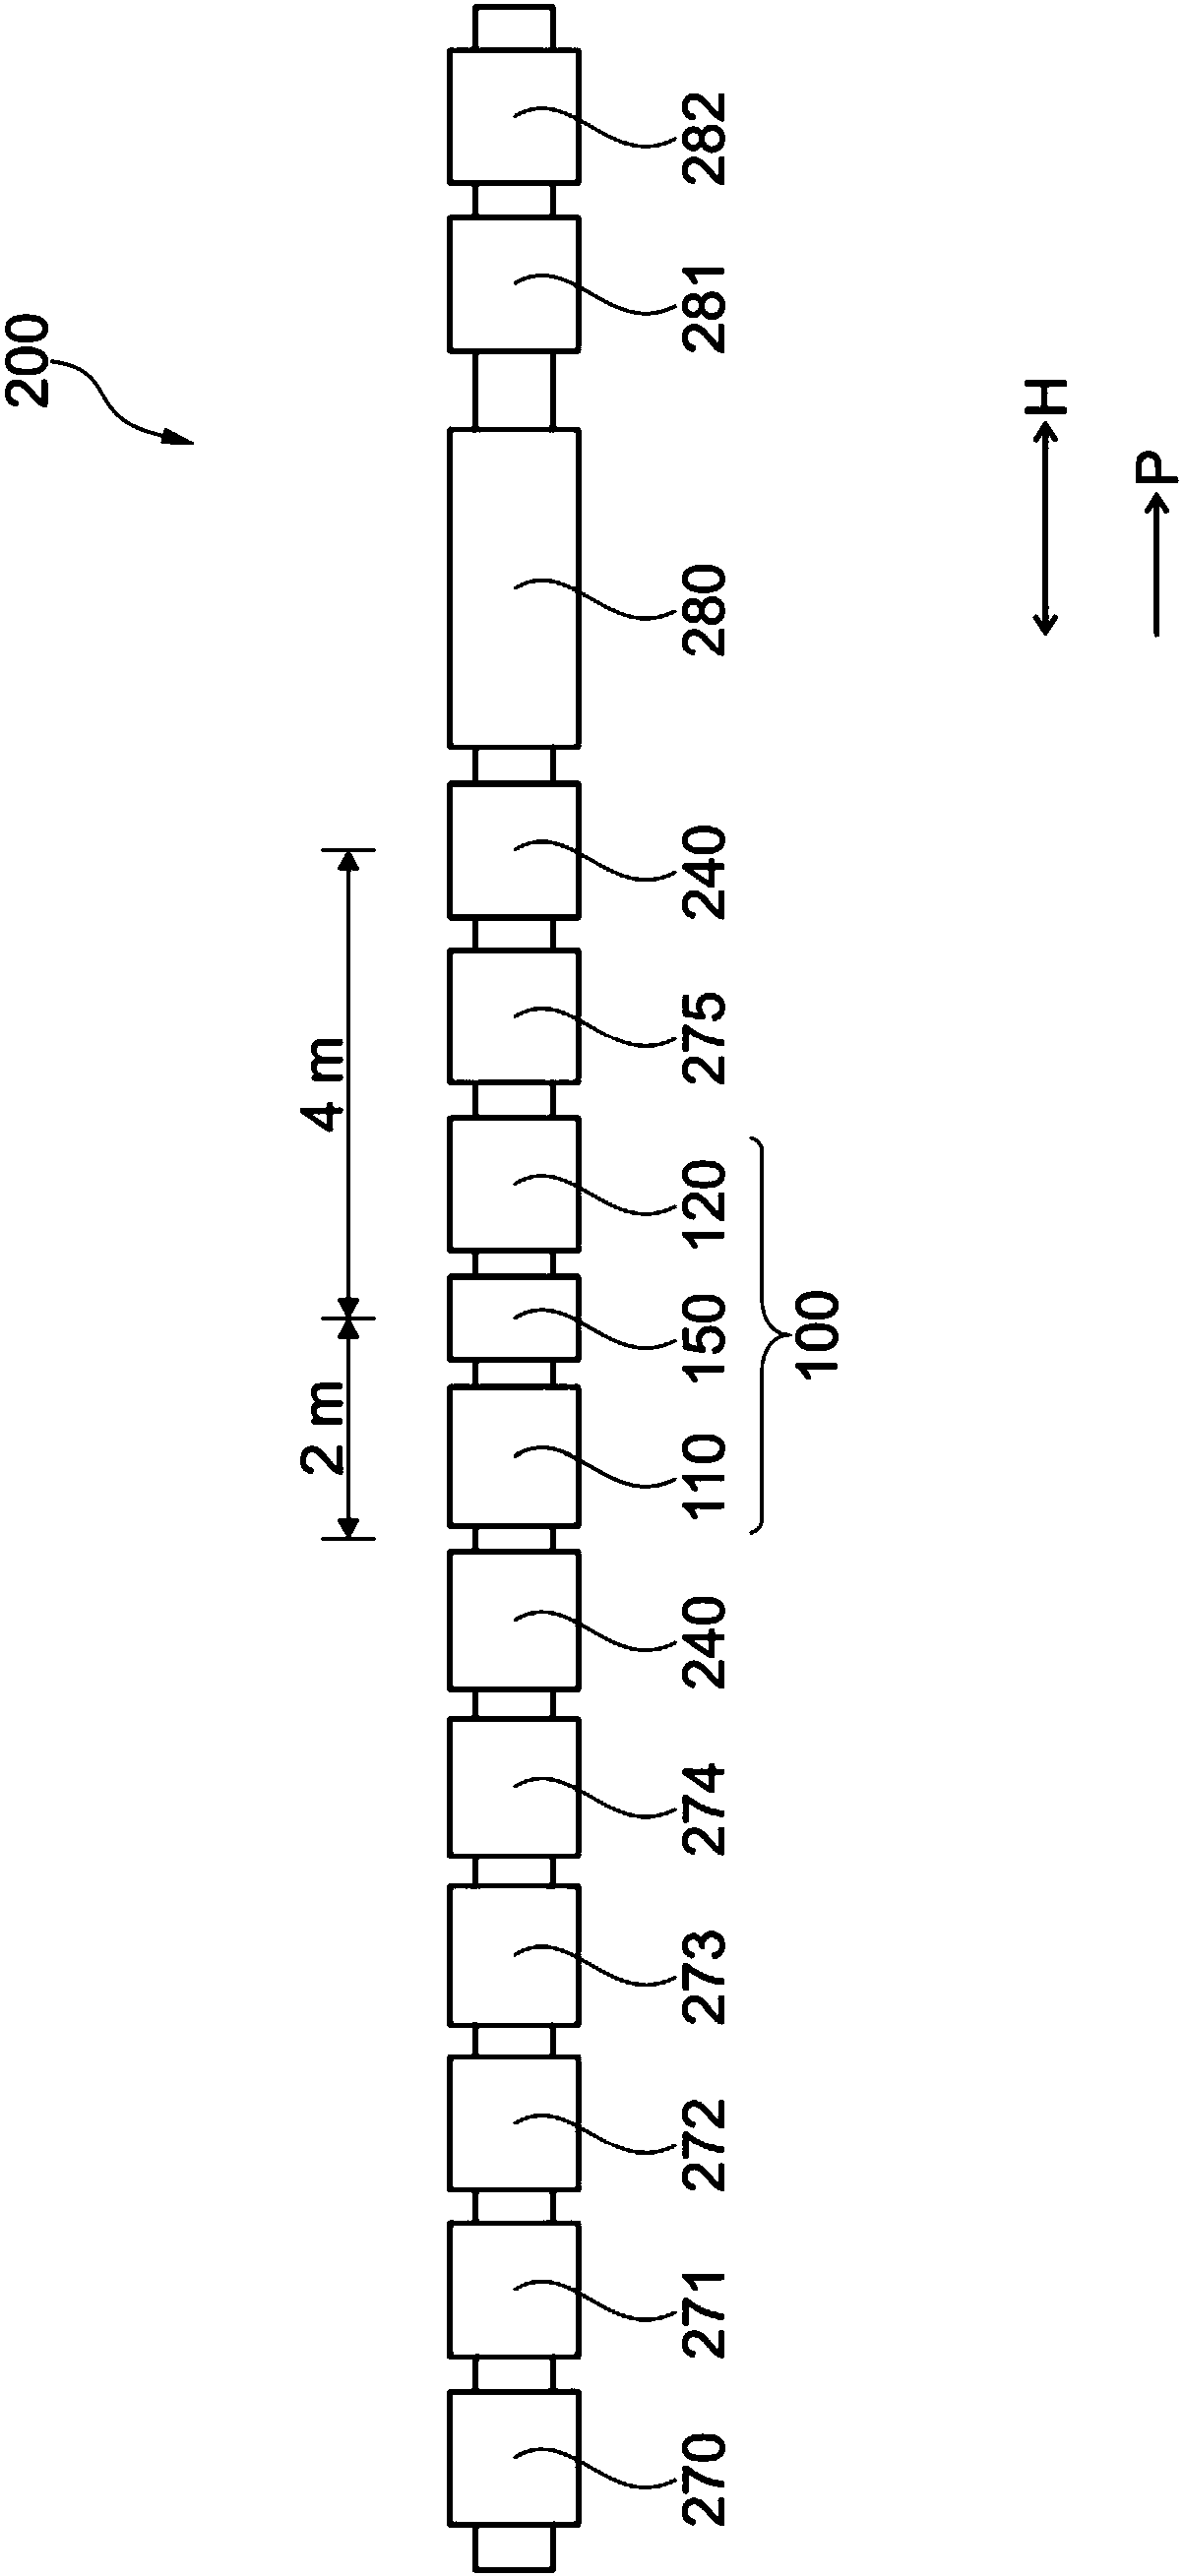 Spatial storage of components between processing positions